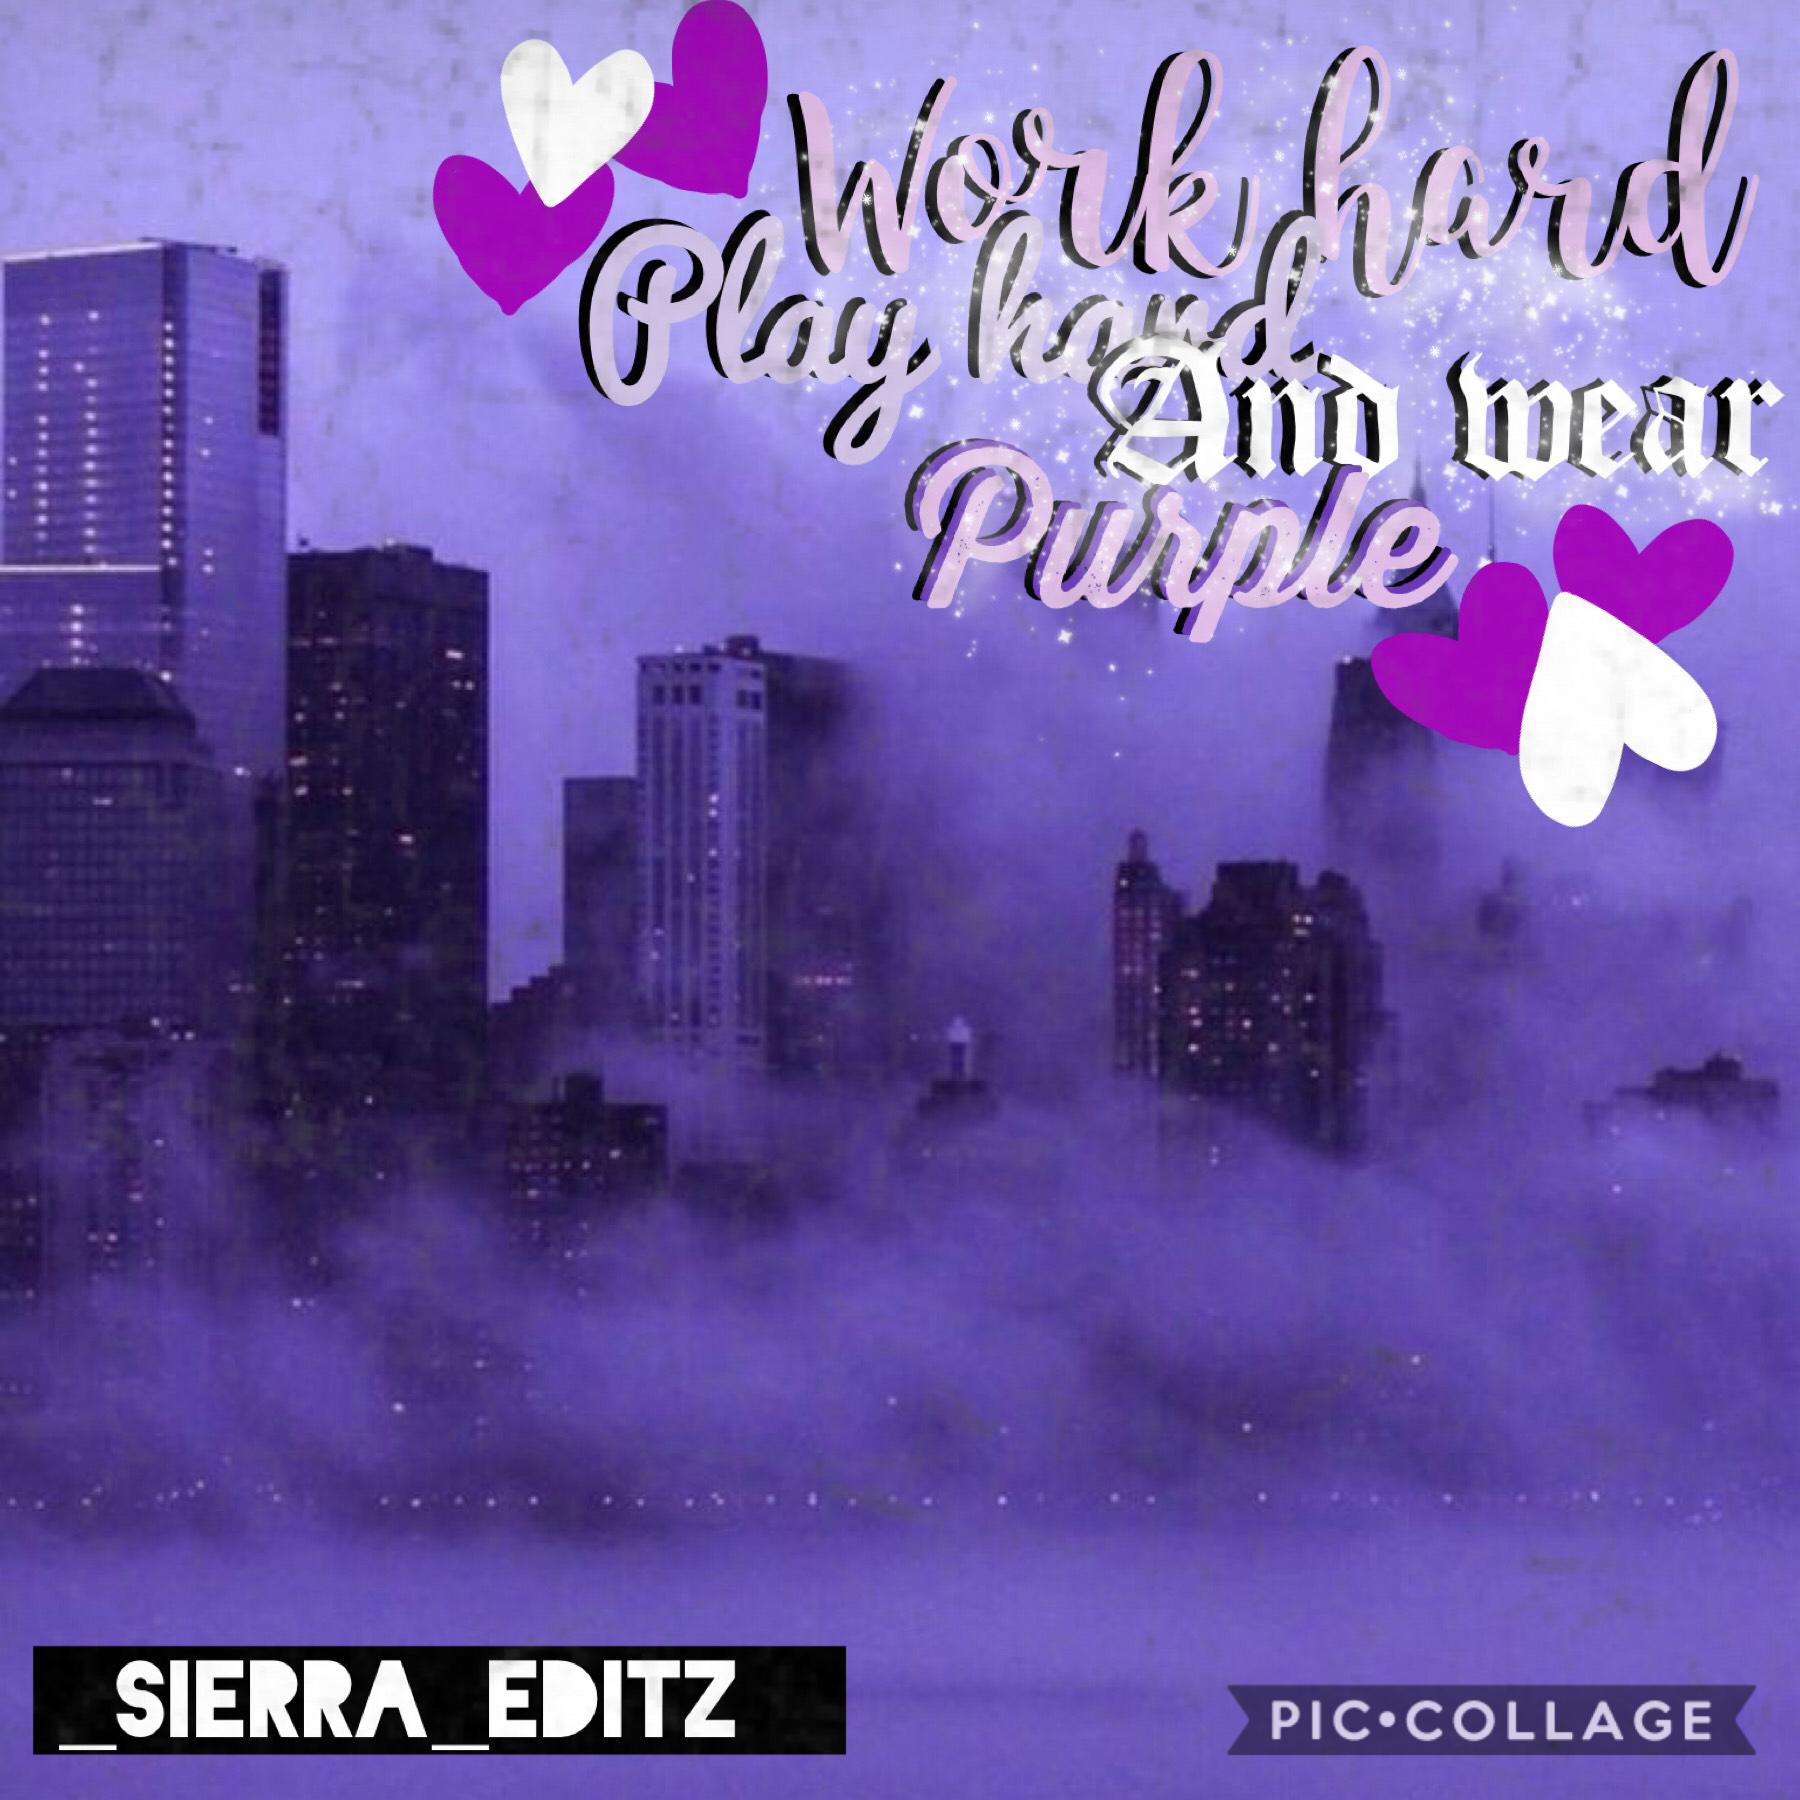 Hiya:) Tap
💜My name is Sierra and I’m new! Here’s a first post for you made by me! Wanna be friends?💜